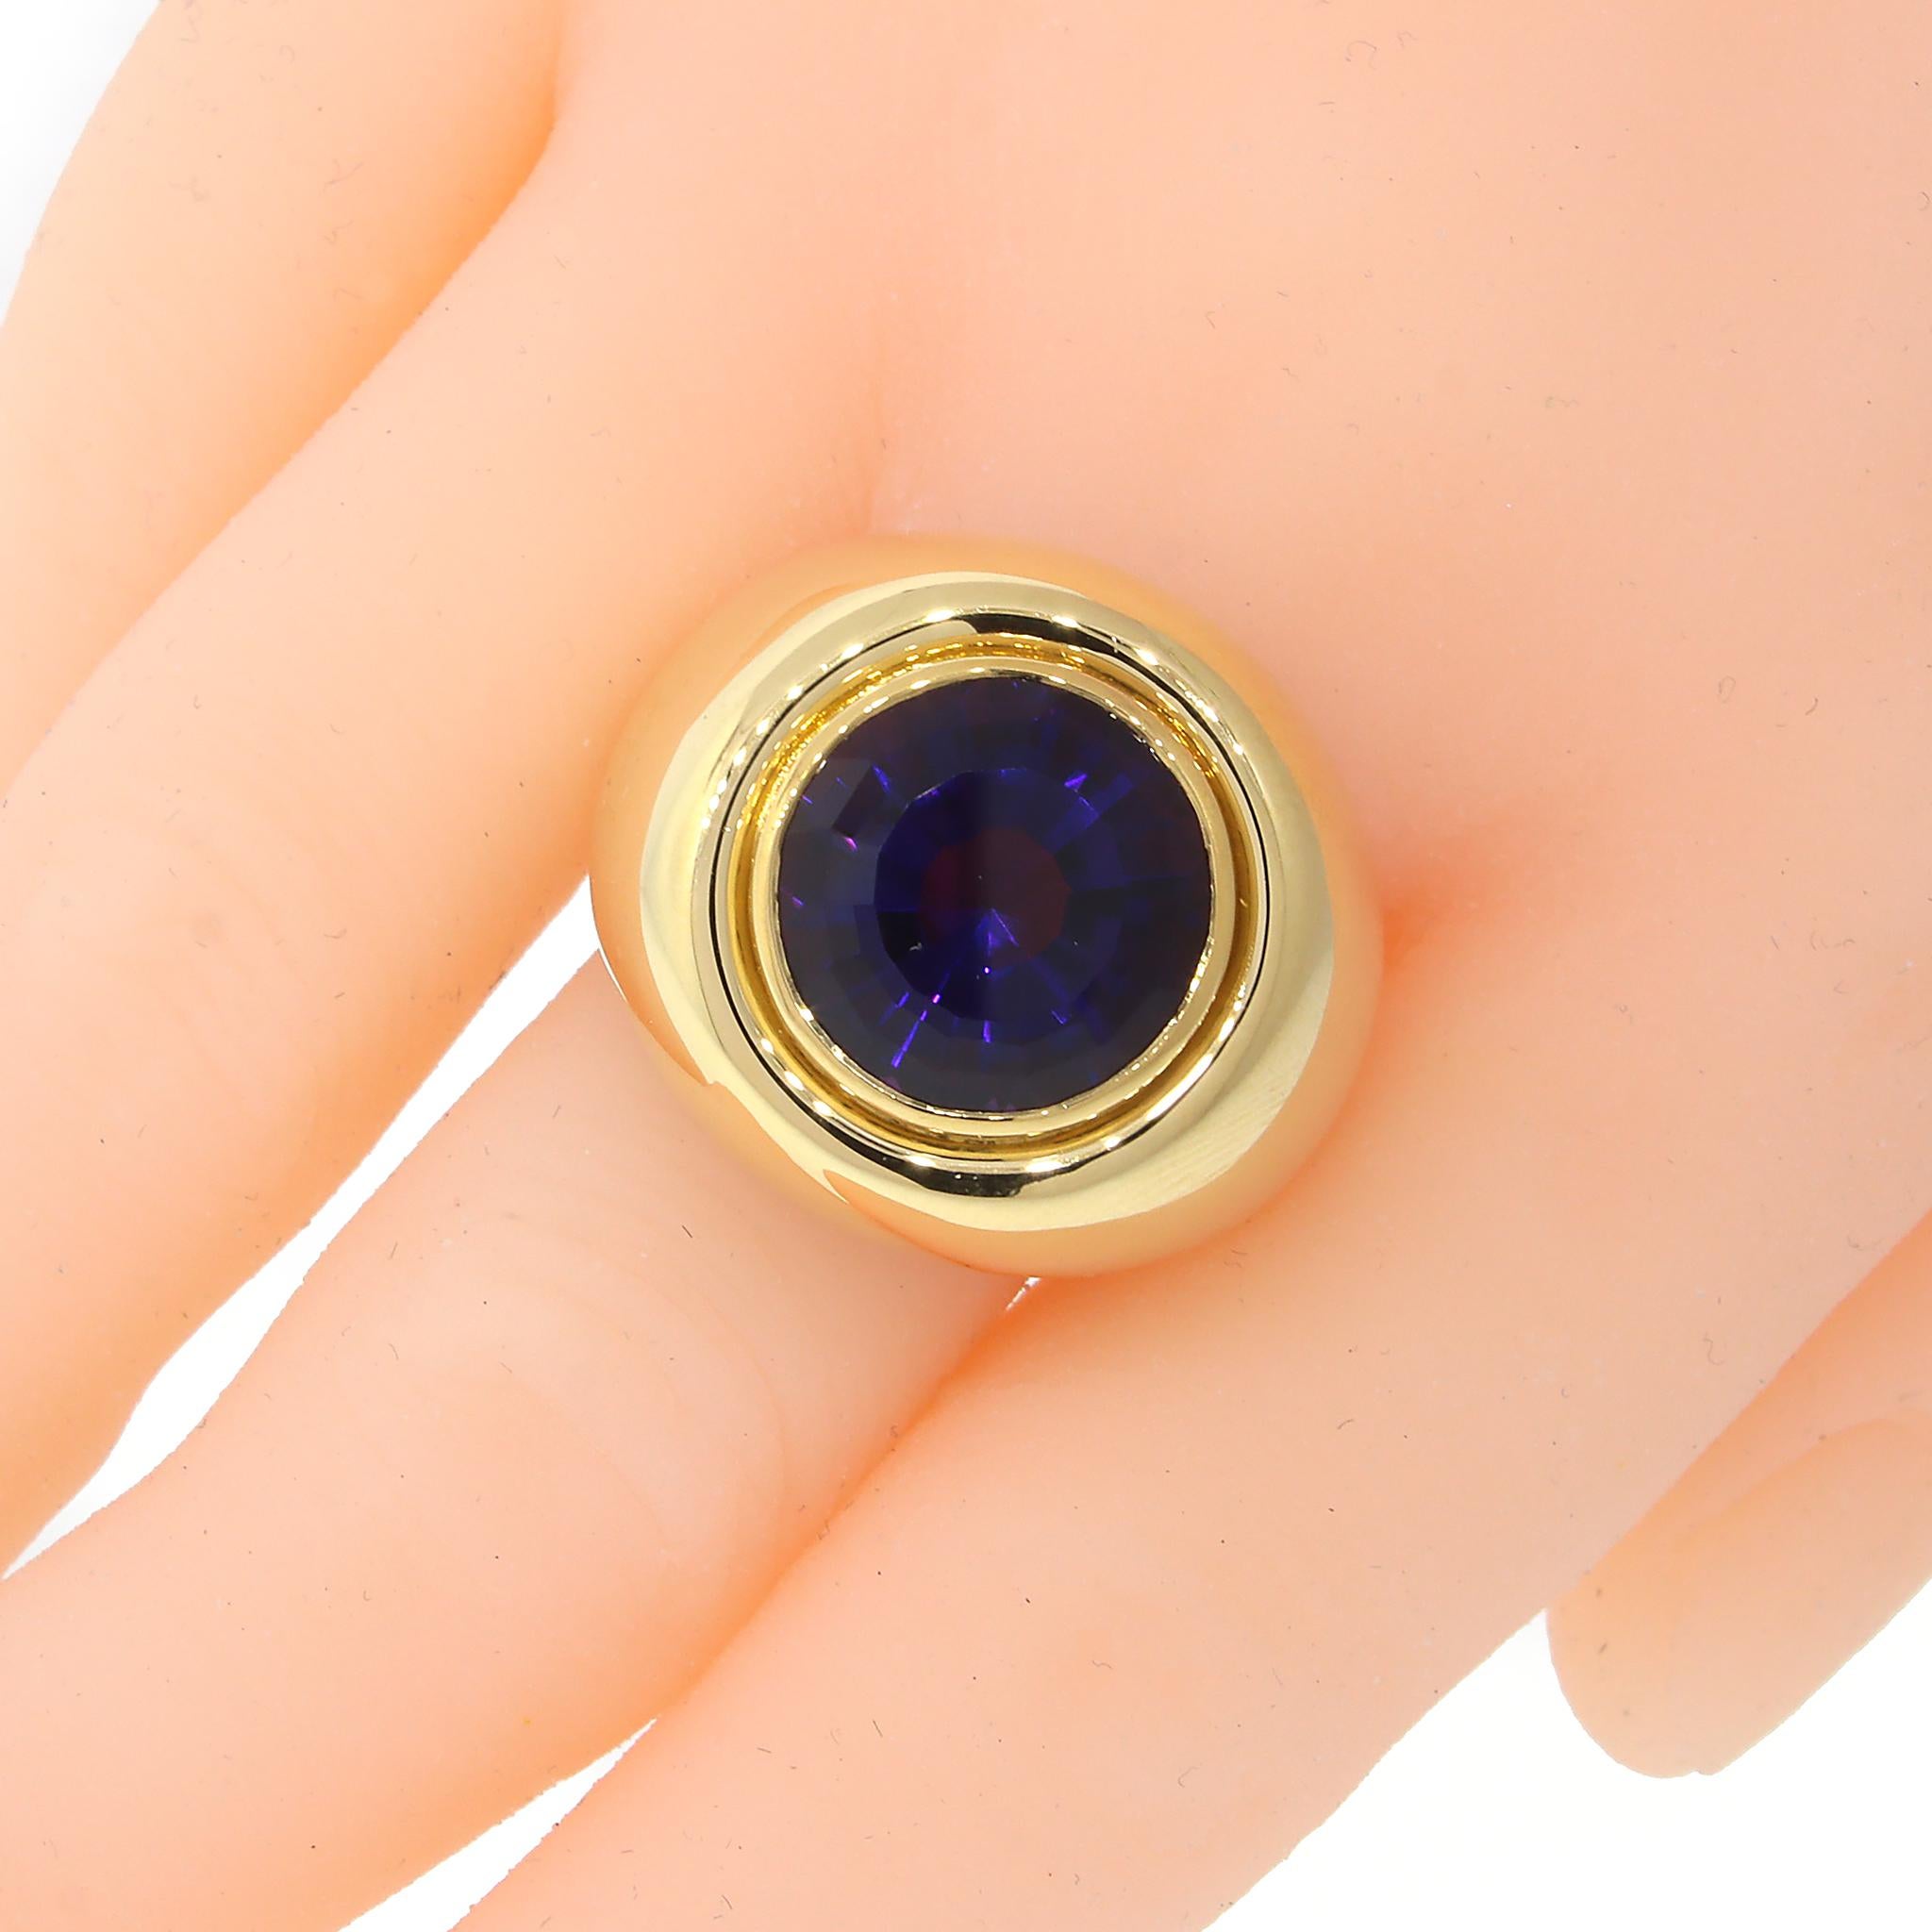 18k Yellow Gold
Amethyst: 8 ct (estimated)
Ring Size: 9.5
Total Weight: 24.5 grams